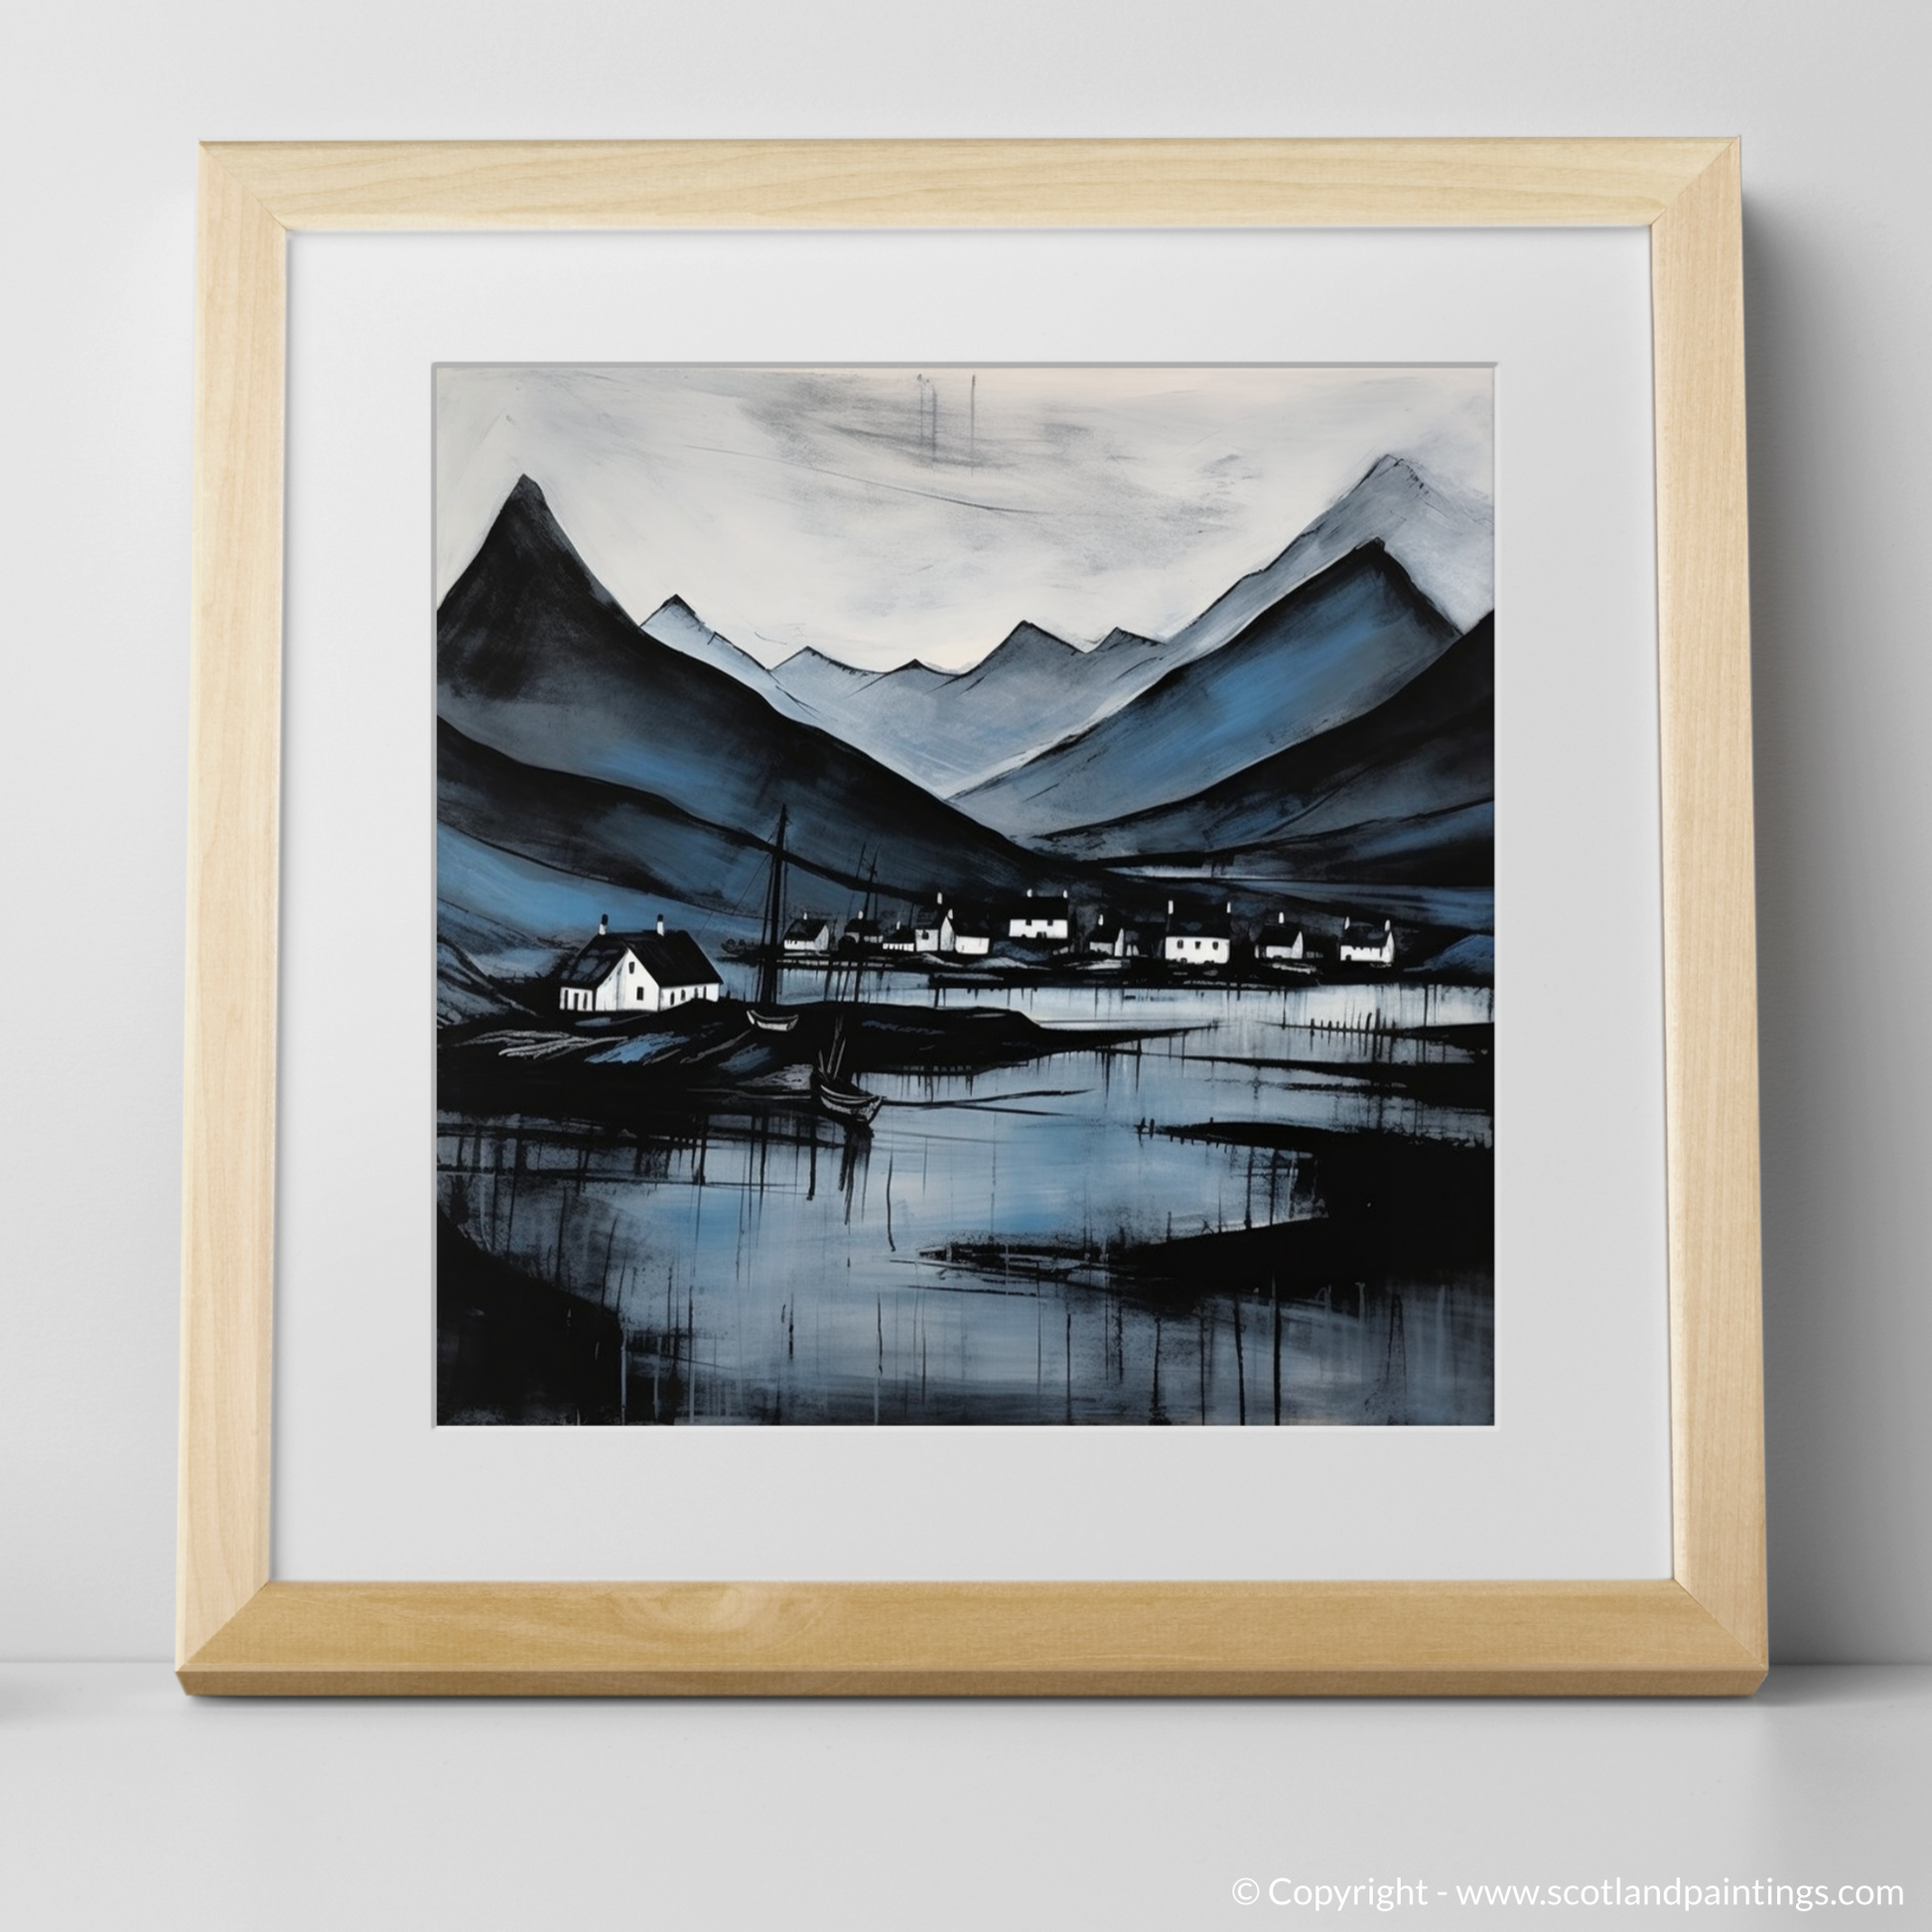 Art Print of Fort William, Highlands with a natural frame